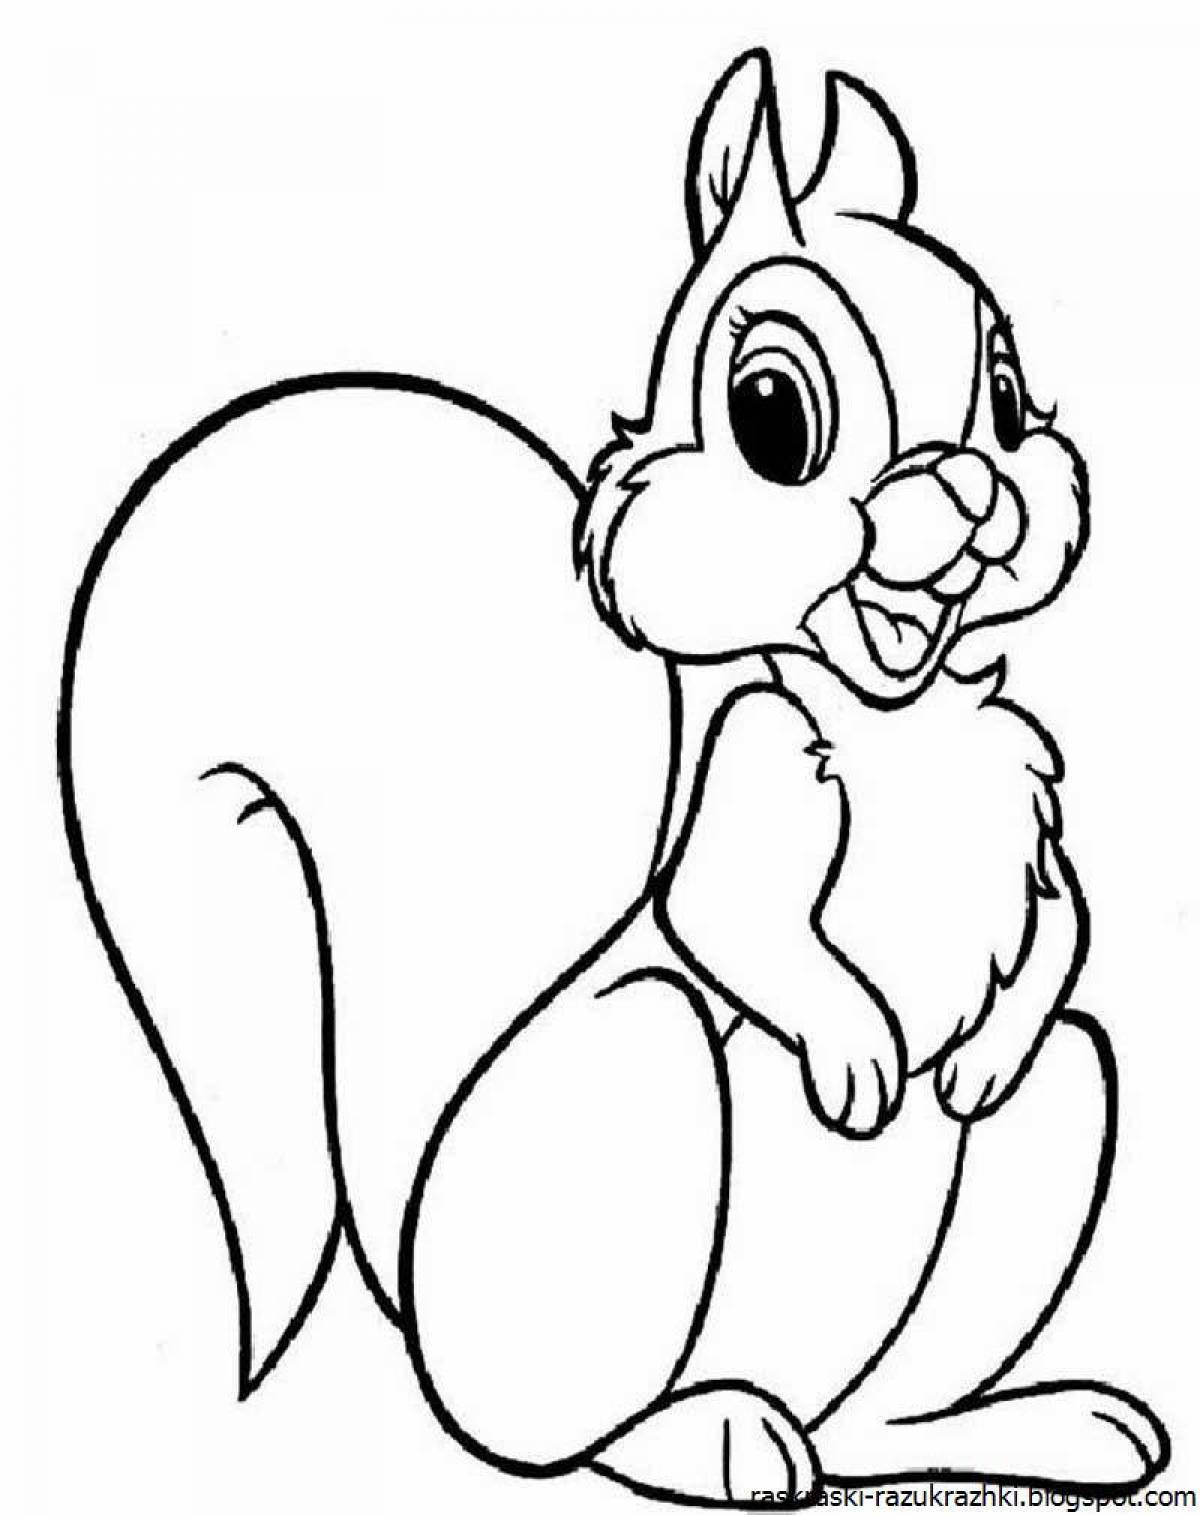 Fancy squirrel coloring for kids